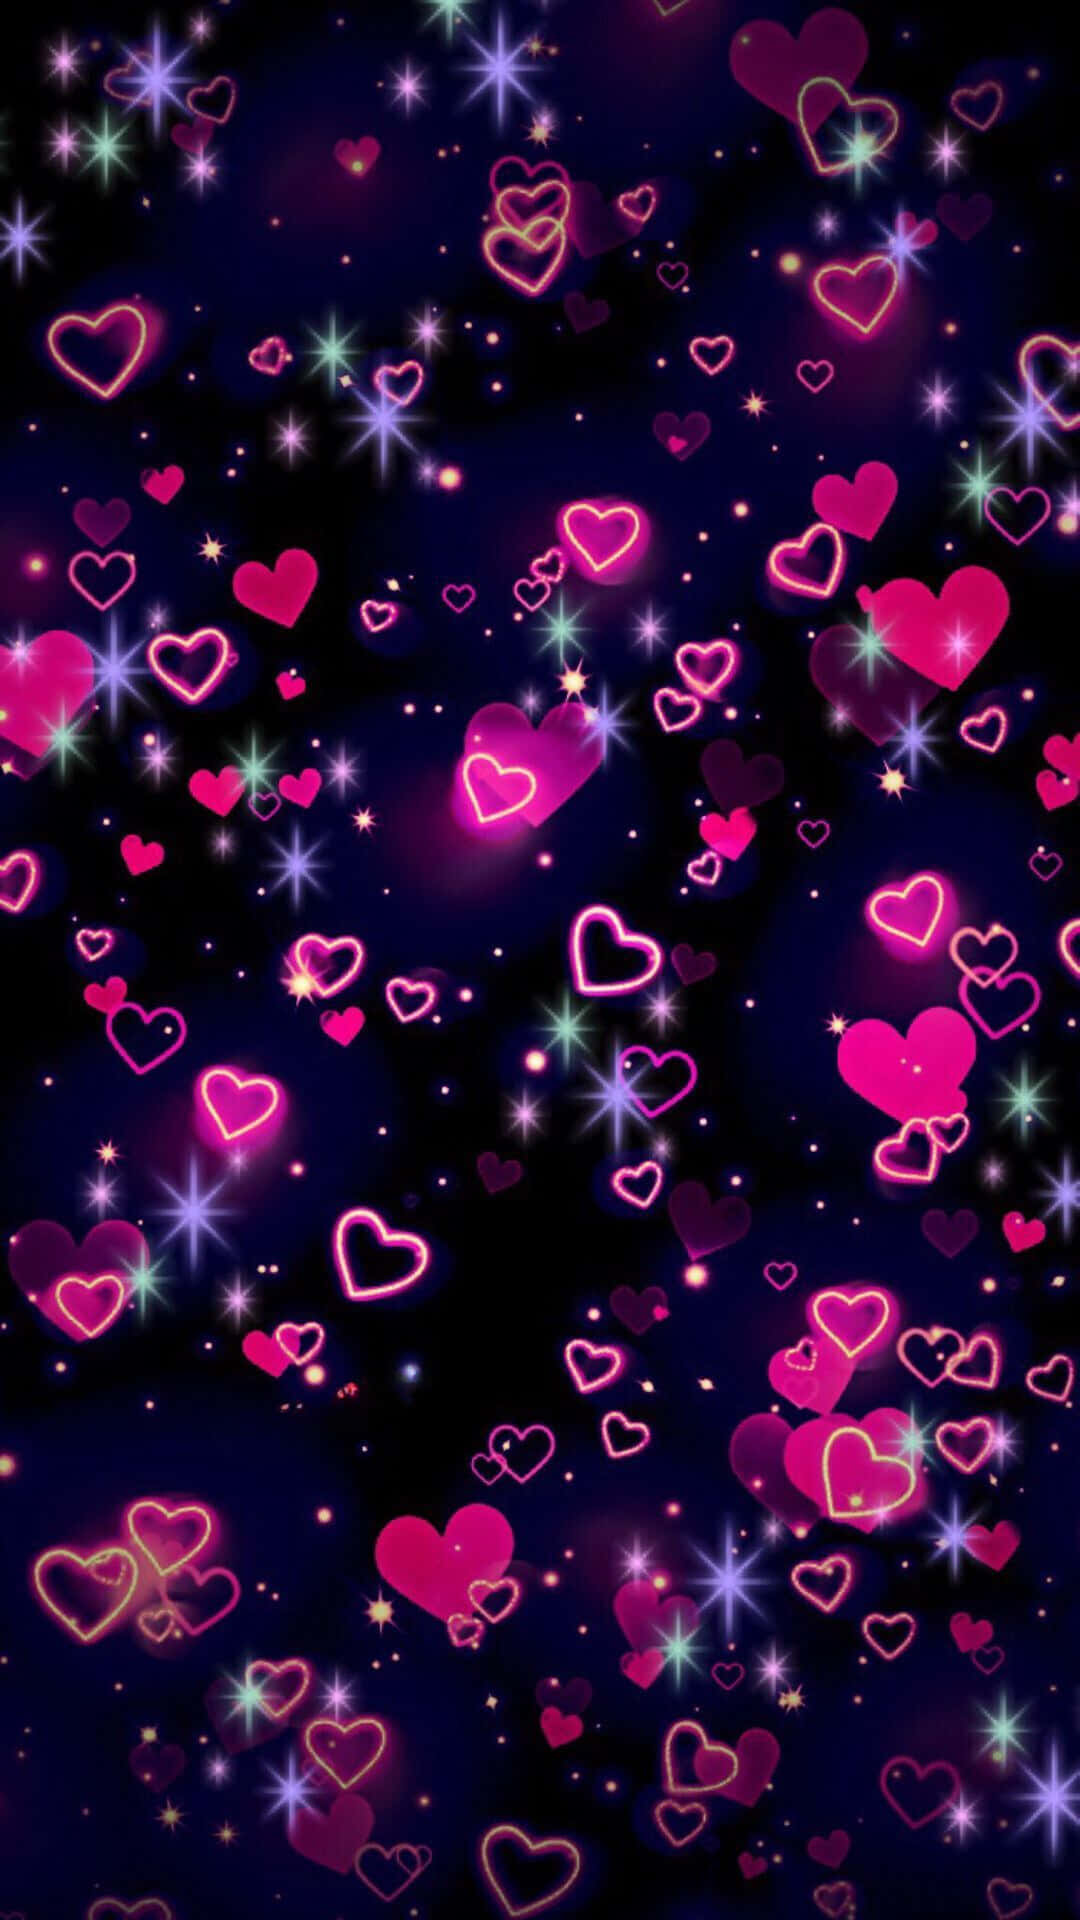 A collection of adorable hearts floating in midair on a pink gradient background Wallpaper